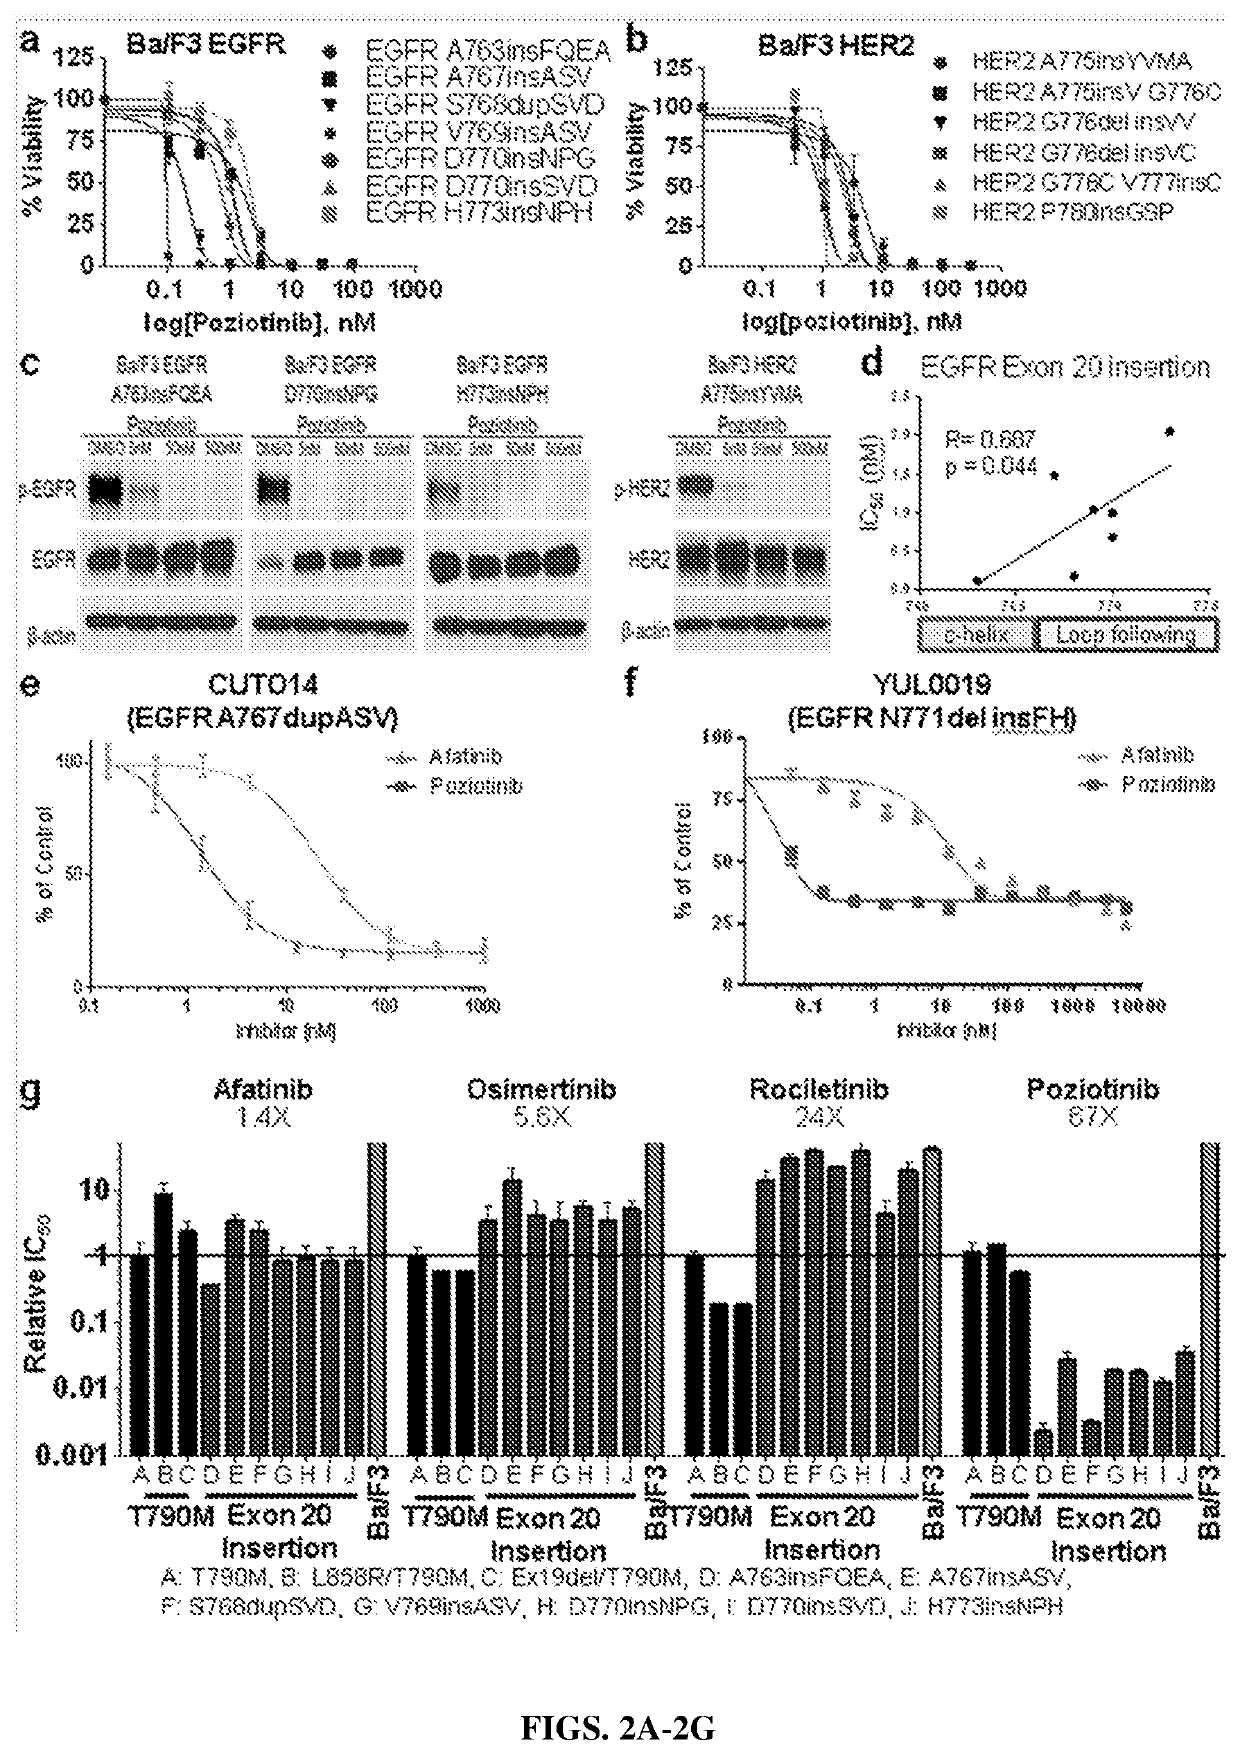 Compounds with Anti-tumor activity against cancer cells bearing EGFR or her2 exon 20 mutations